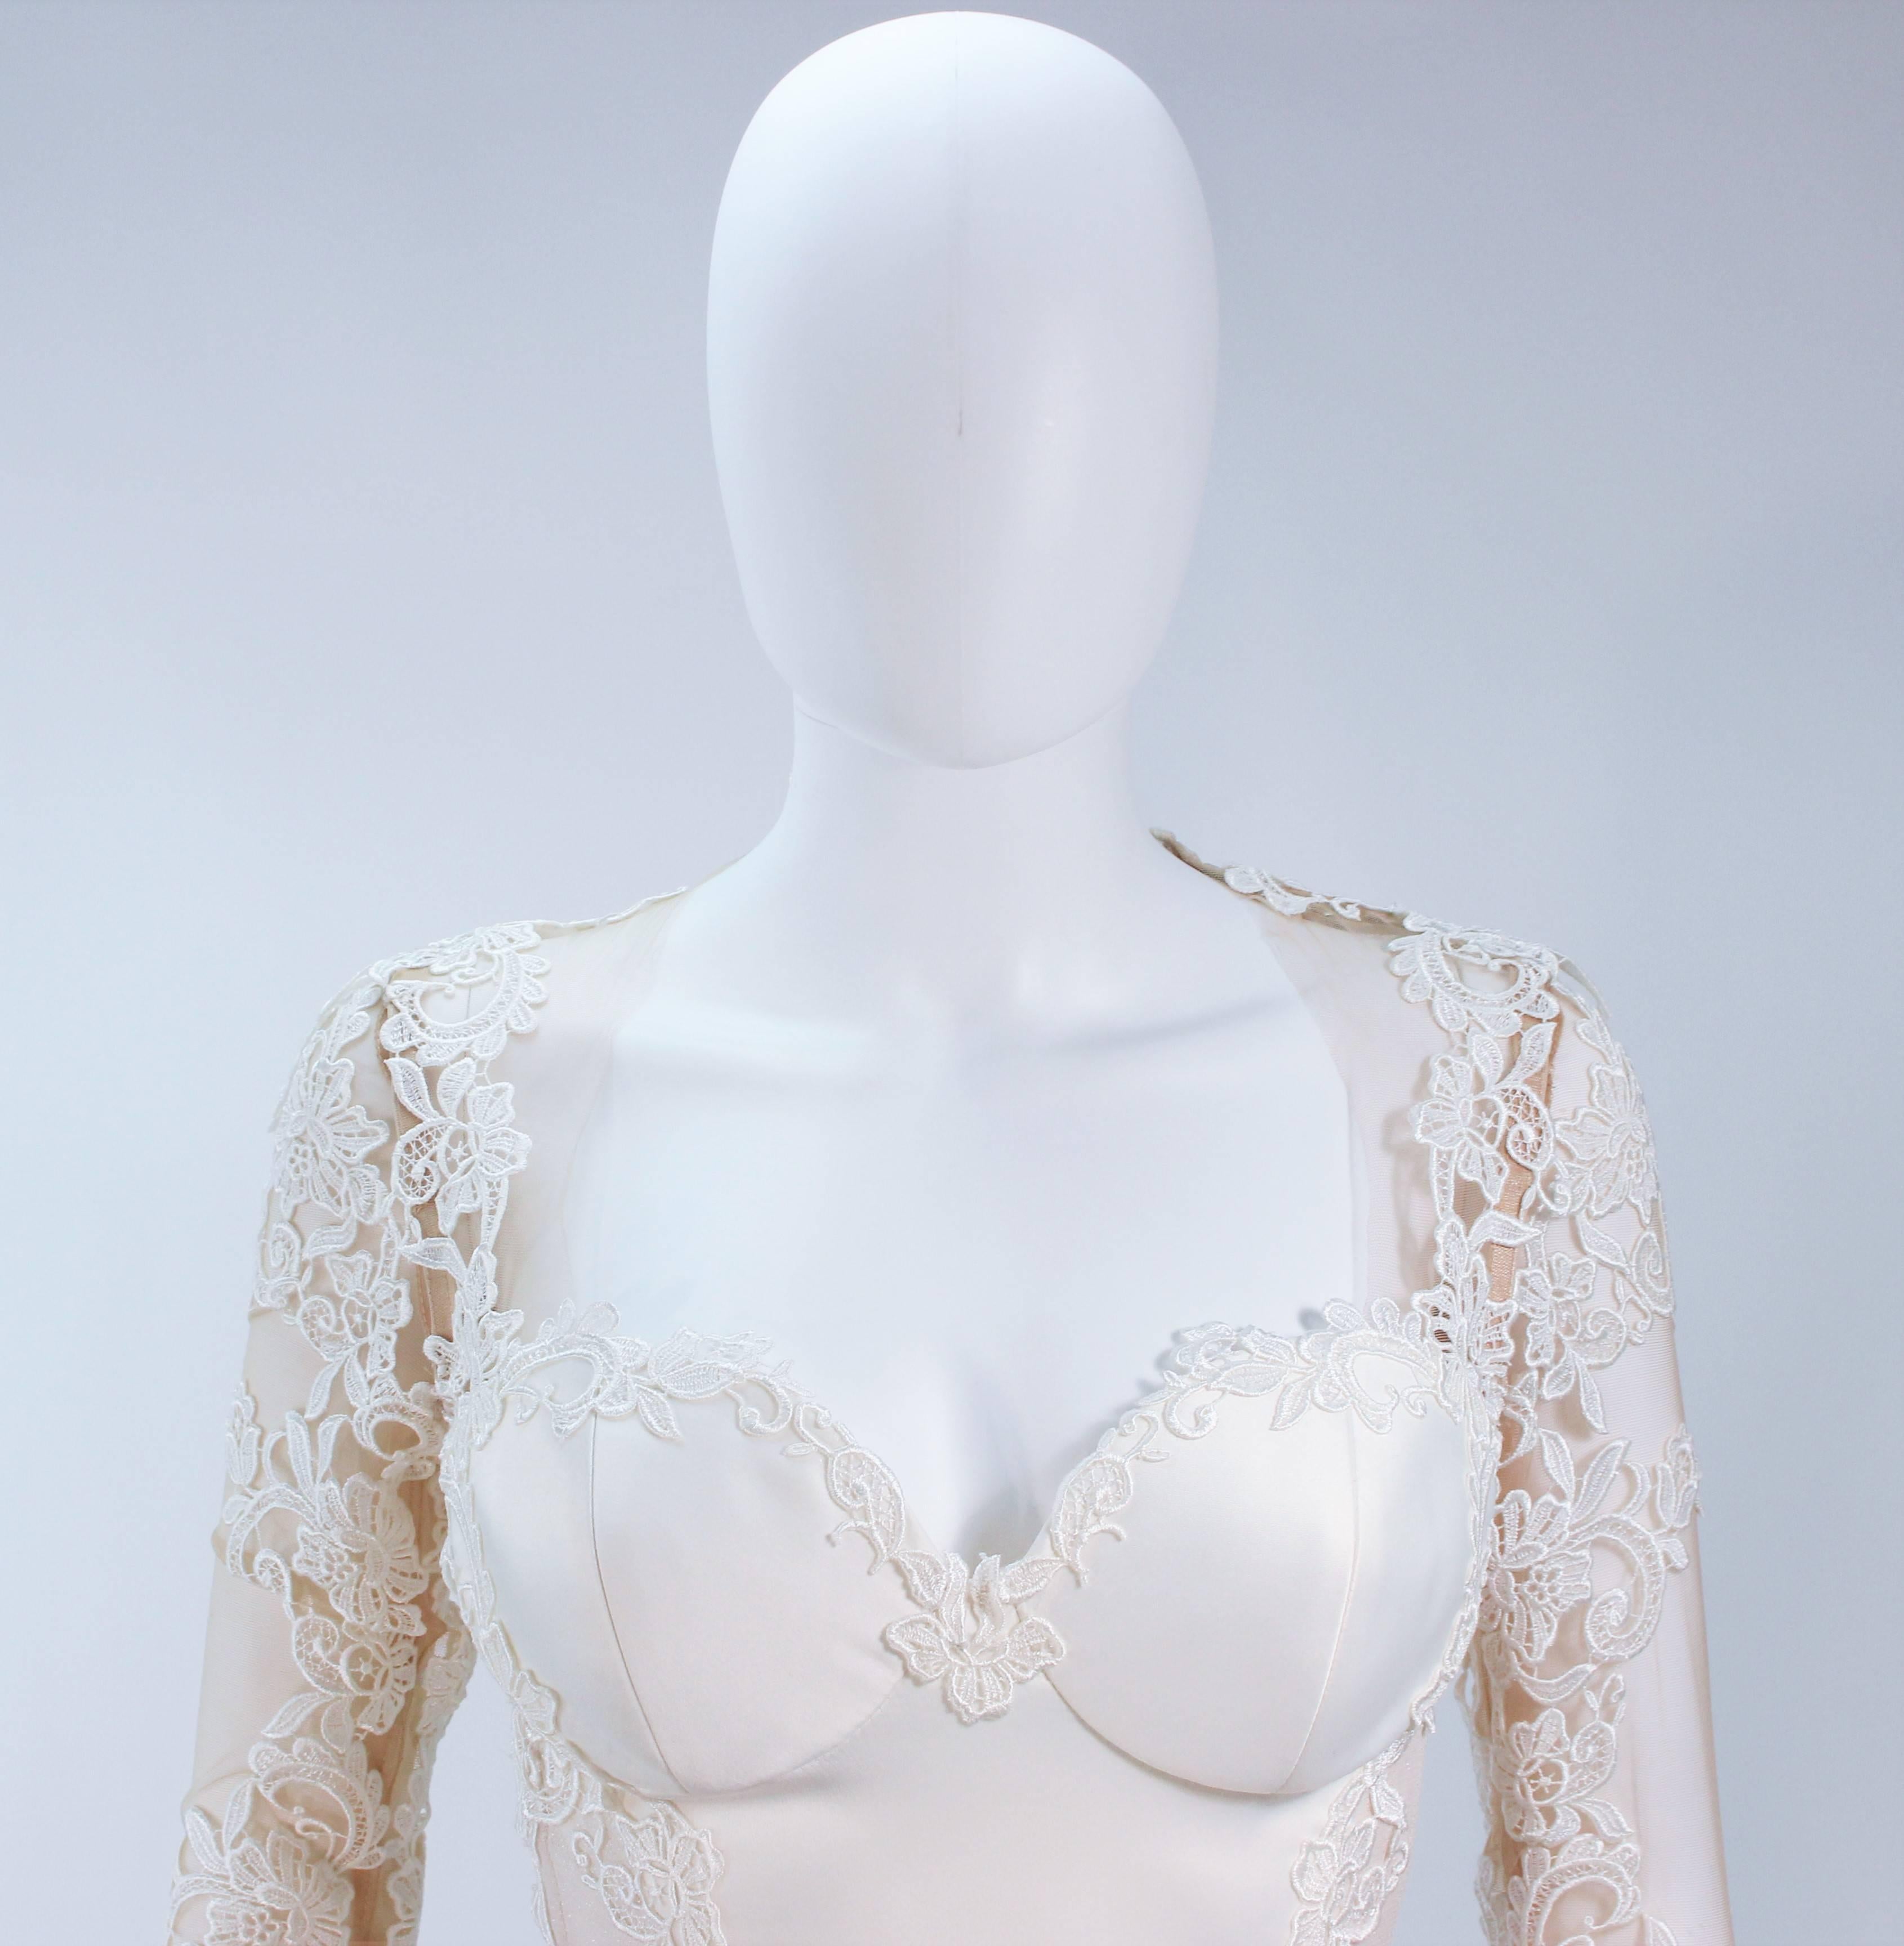 Women's GALIA LAHAV Couture White Floral Lace Gown with Train and Sheer Details Size 2